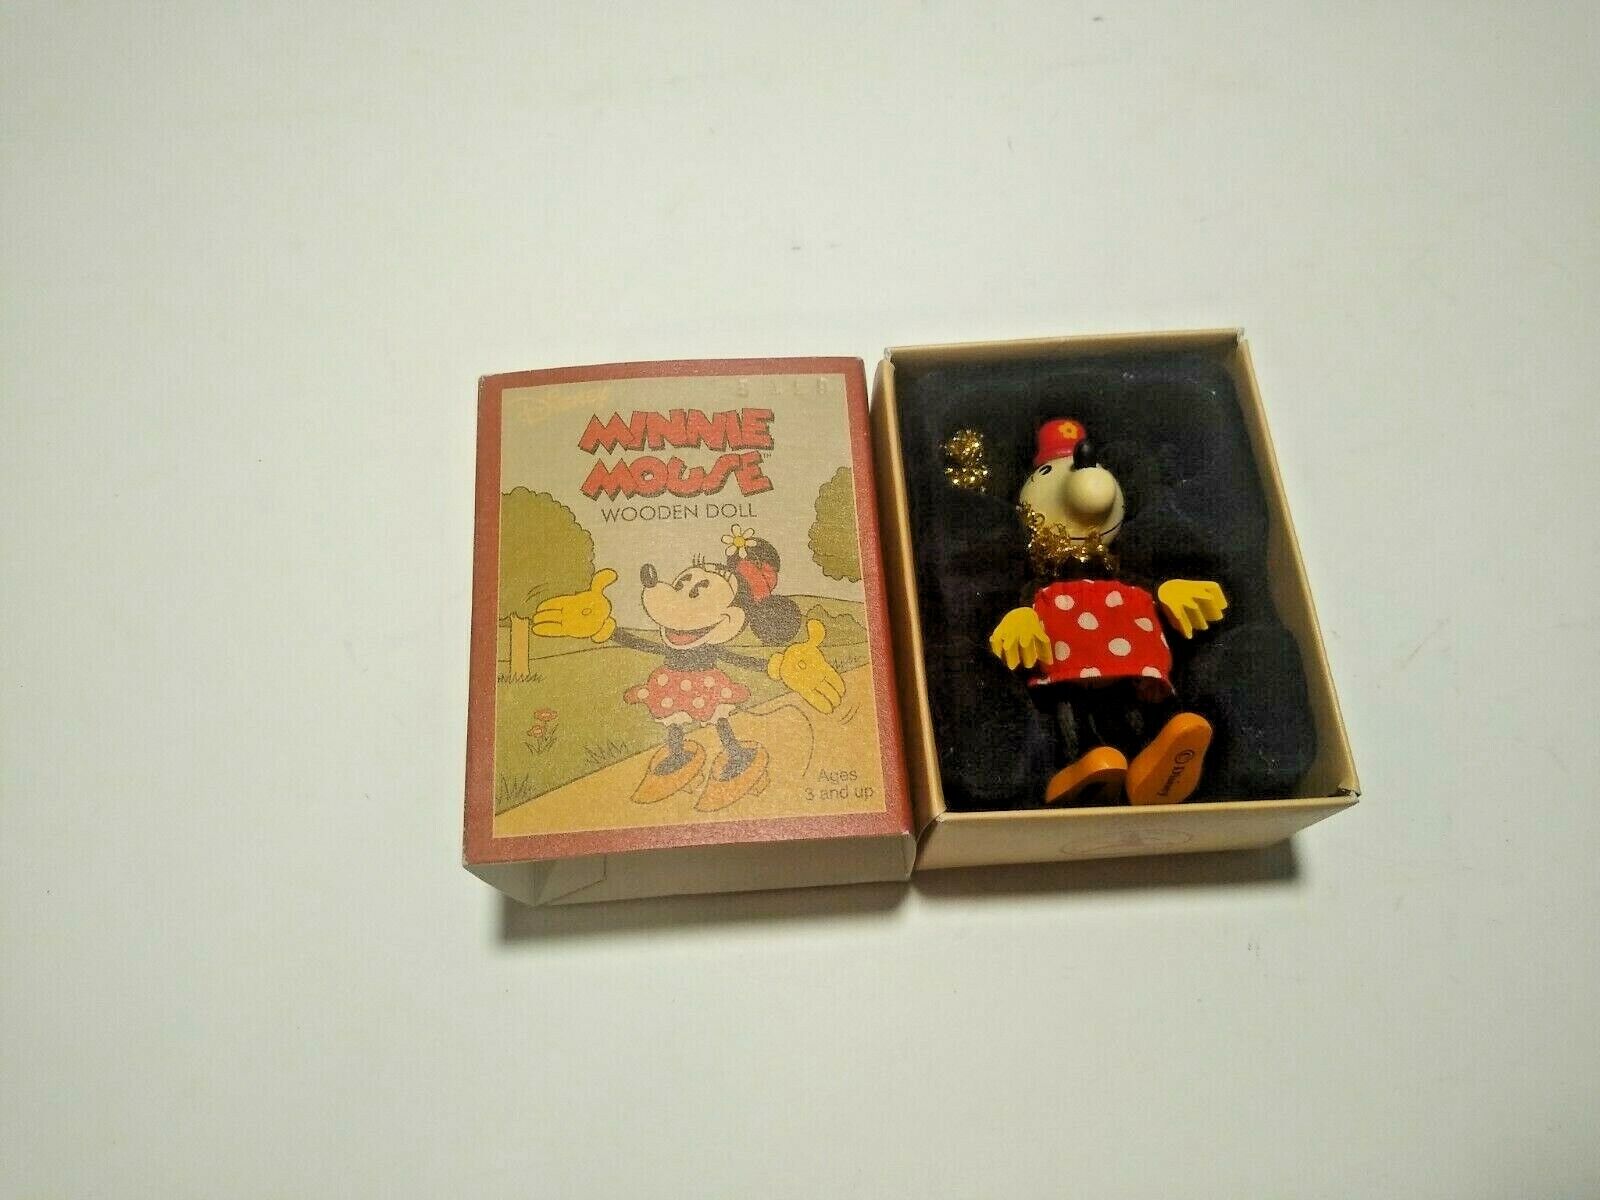 Schylling Disney Minnie Mouse Wooden Doll Vintage Original Box  Retro Collection